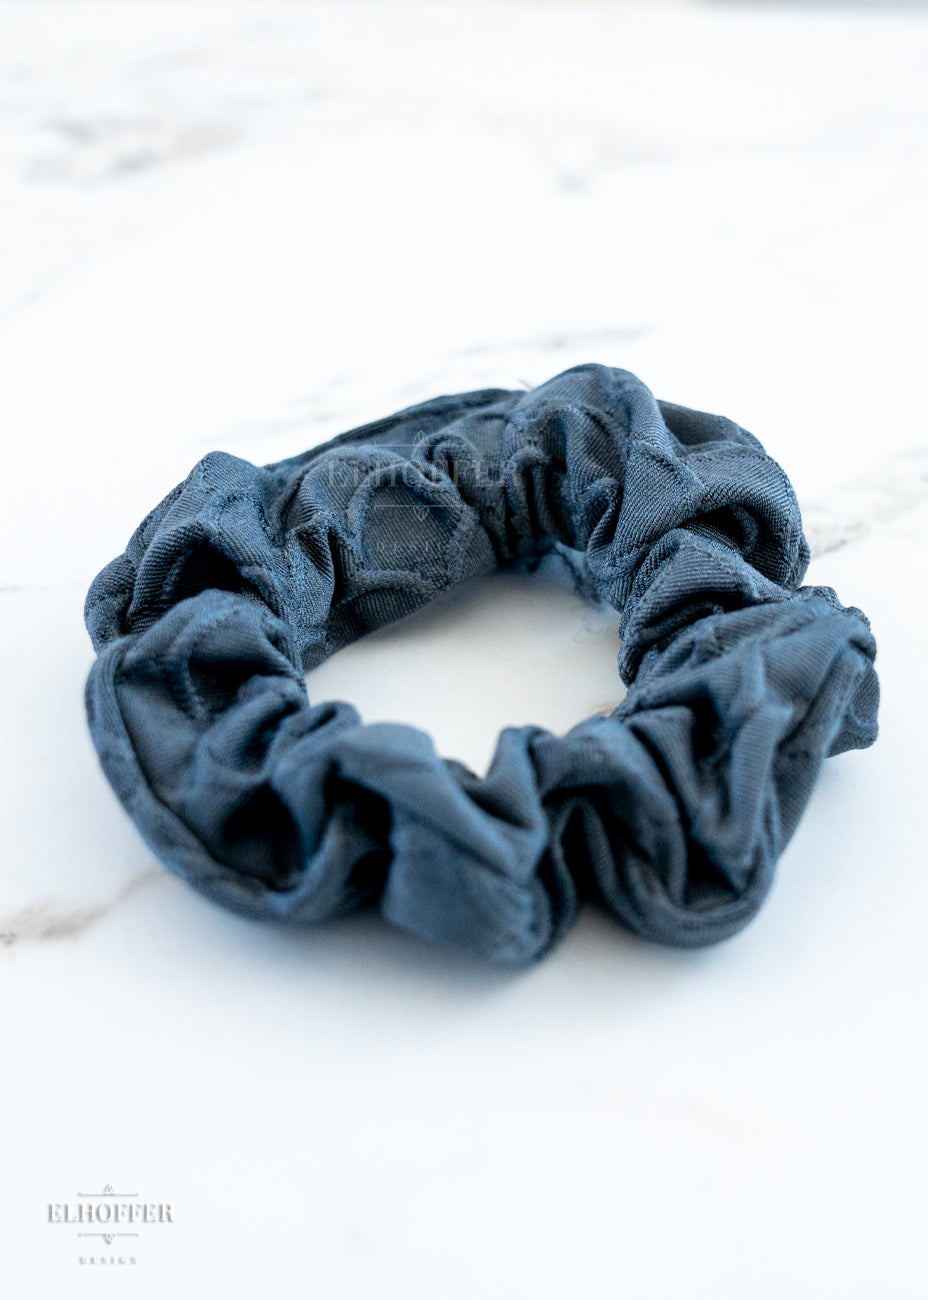 A grey scale textured scrunchie on a white marbled background.